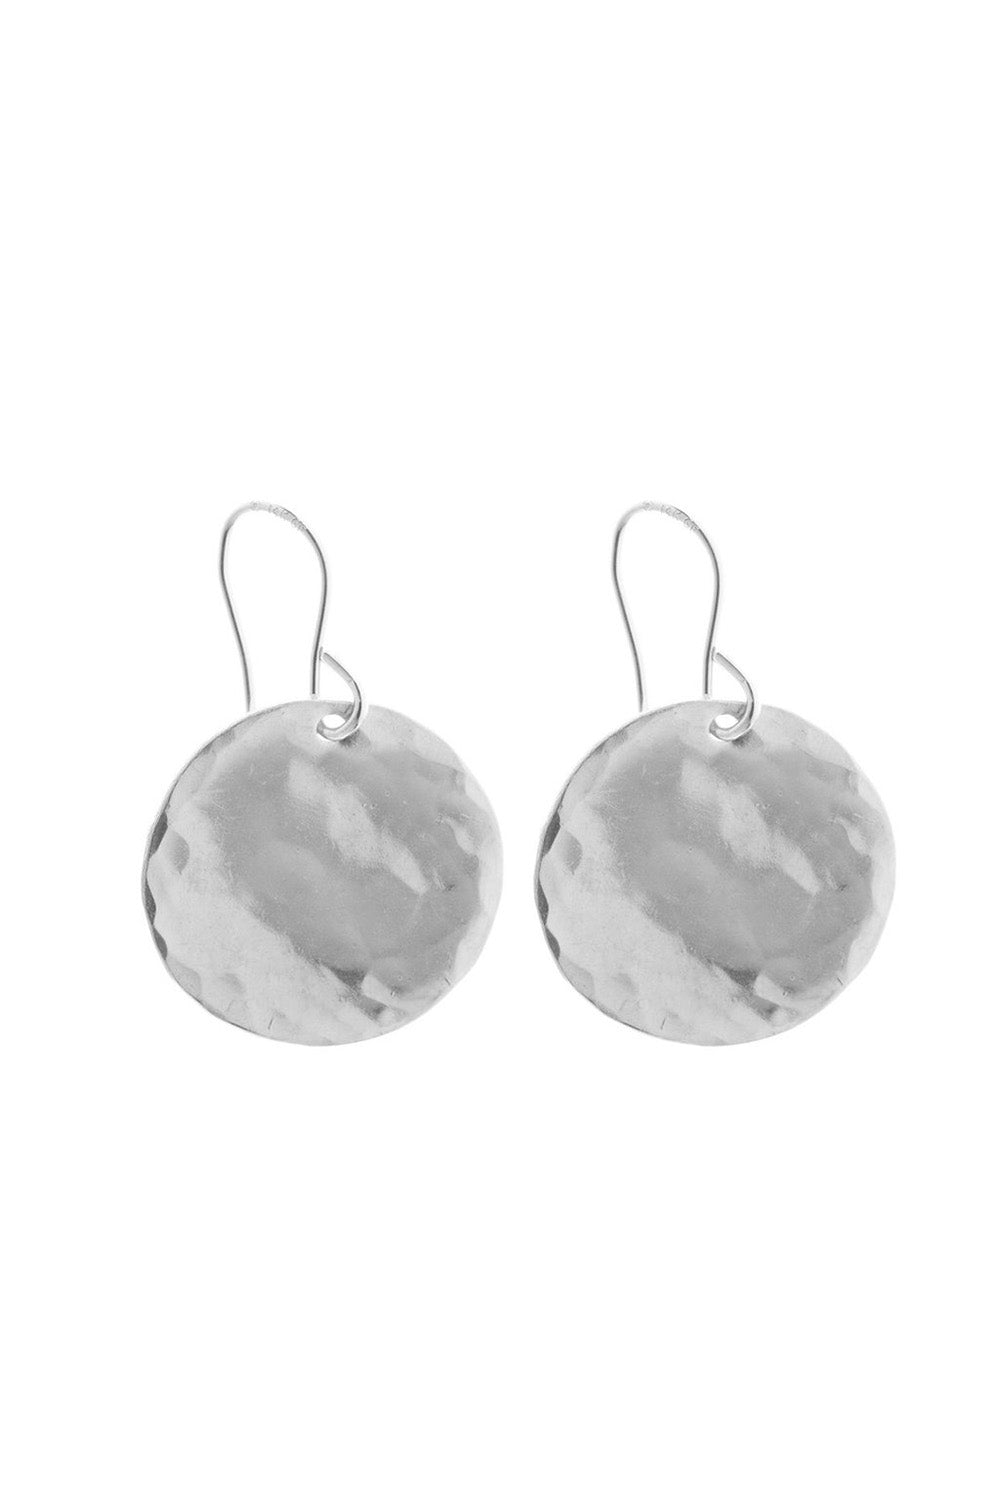 CLASSIC HAMMERED DISK EARRING SILVER - CrateExpectations